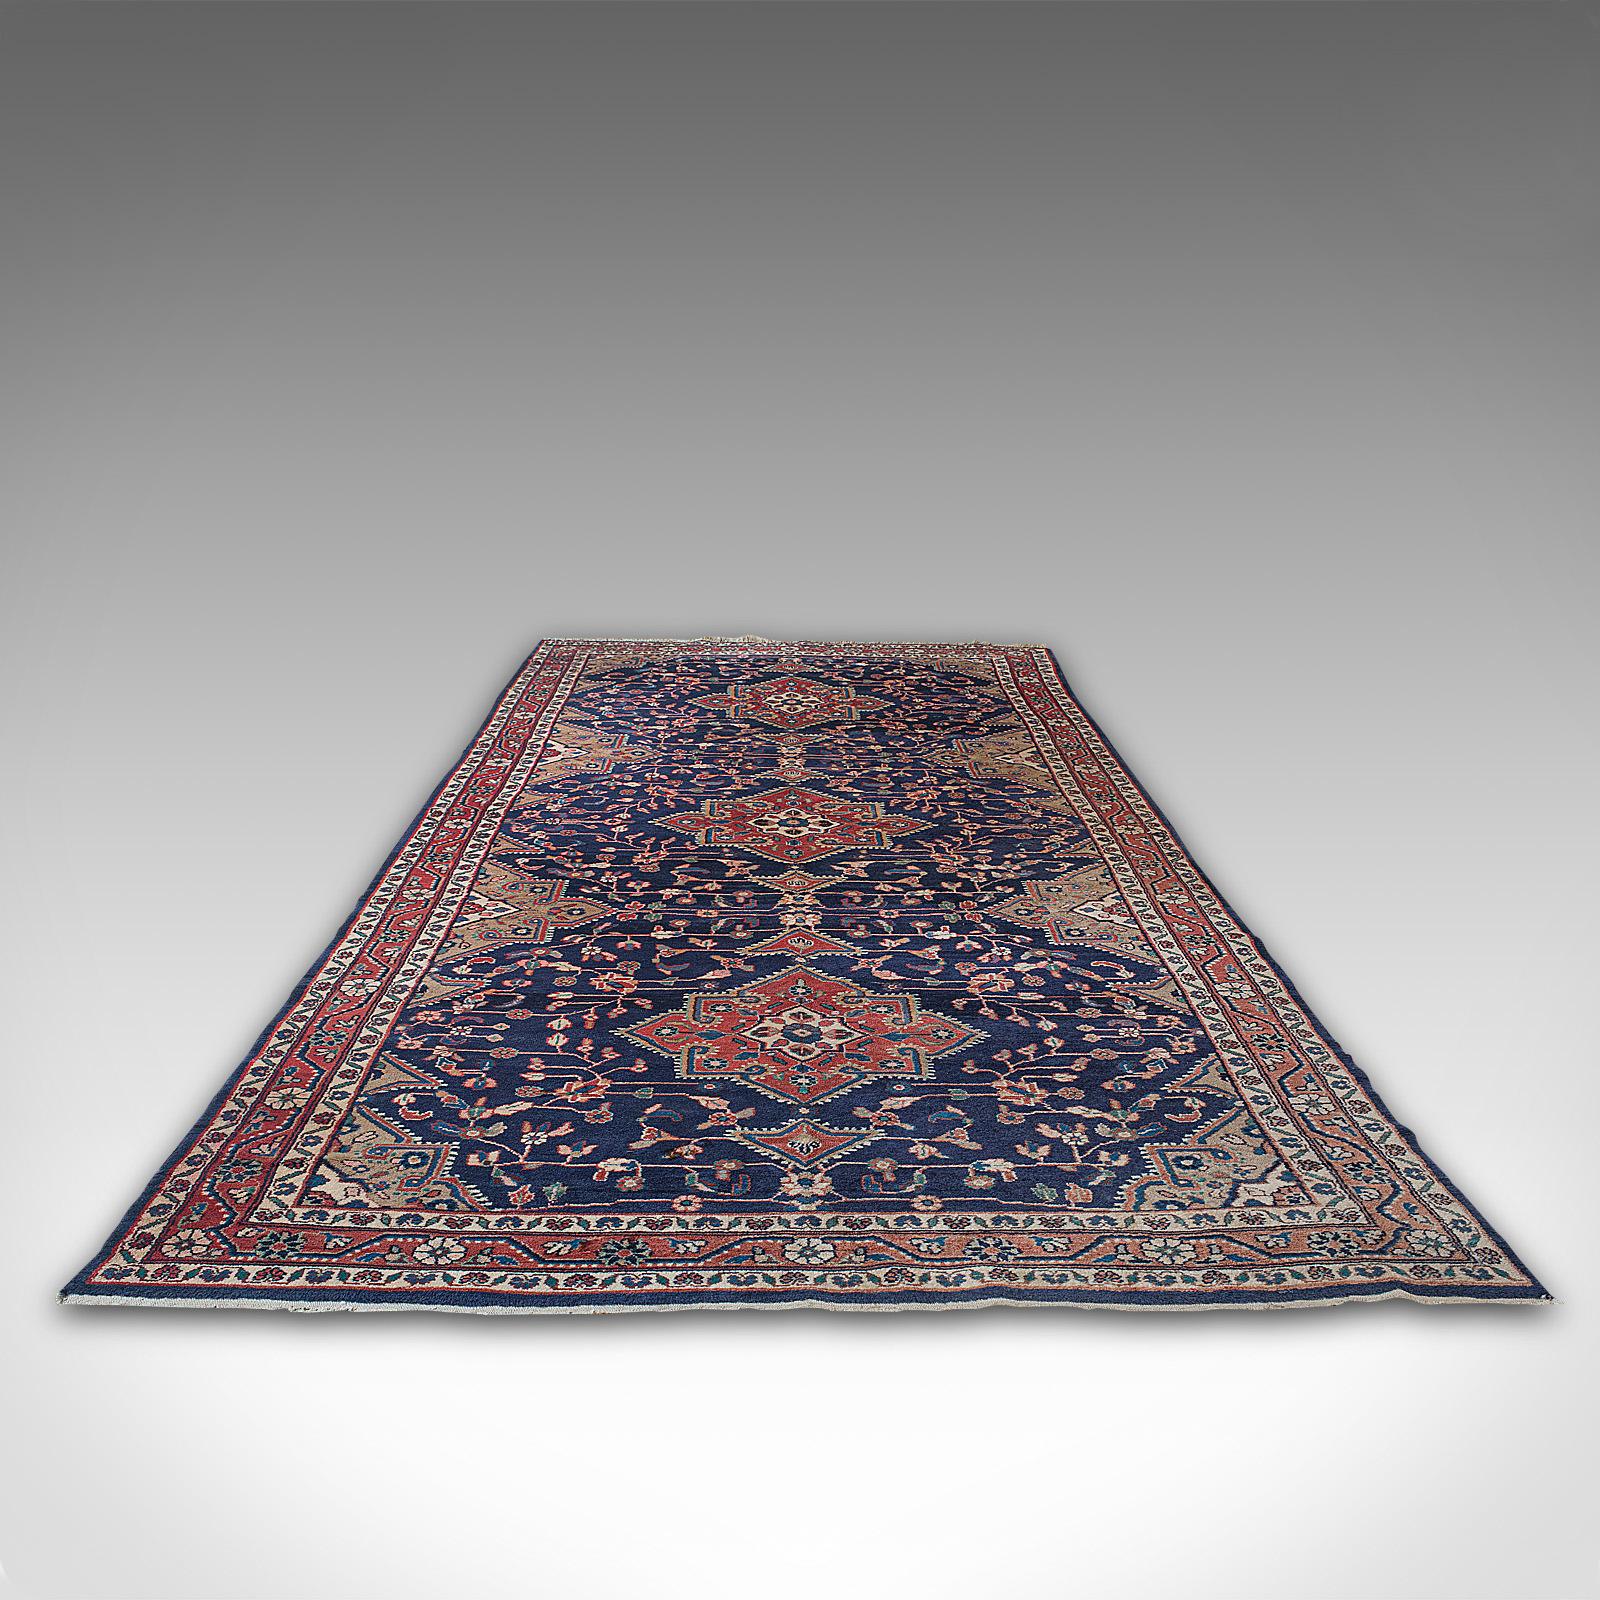 This is a large vintage Hamadan hall carpet. A Persian, quality lounge or hallway rug, dating to the mid-20th century, circa 1950.

Ideal for the spacious room or reception at 183cm (72”) x 397cm (156.25”)
Displays a desirable aged patina, light